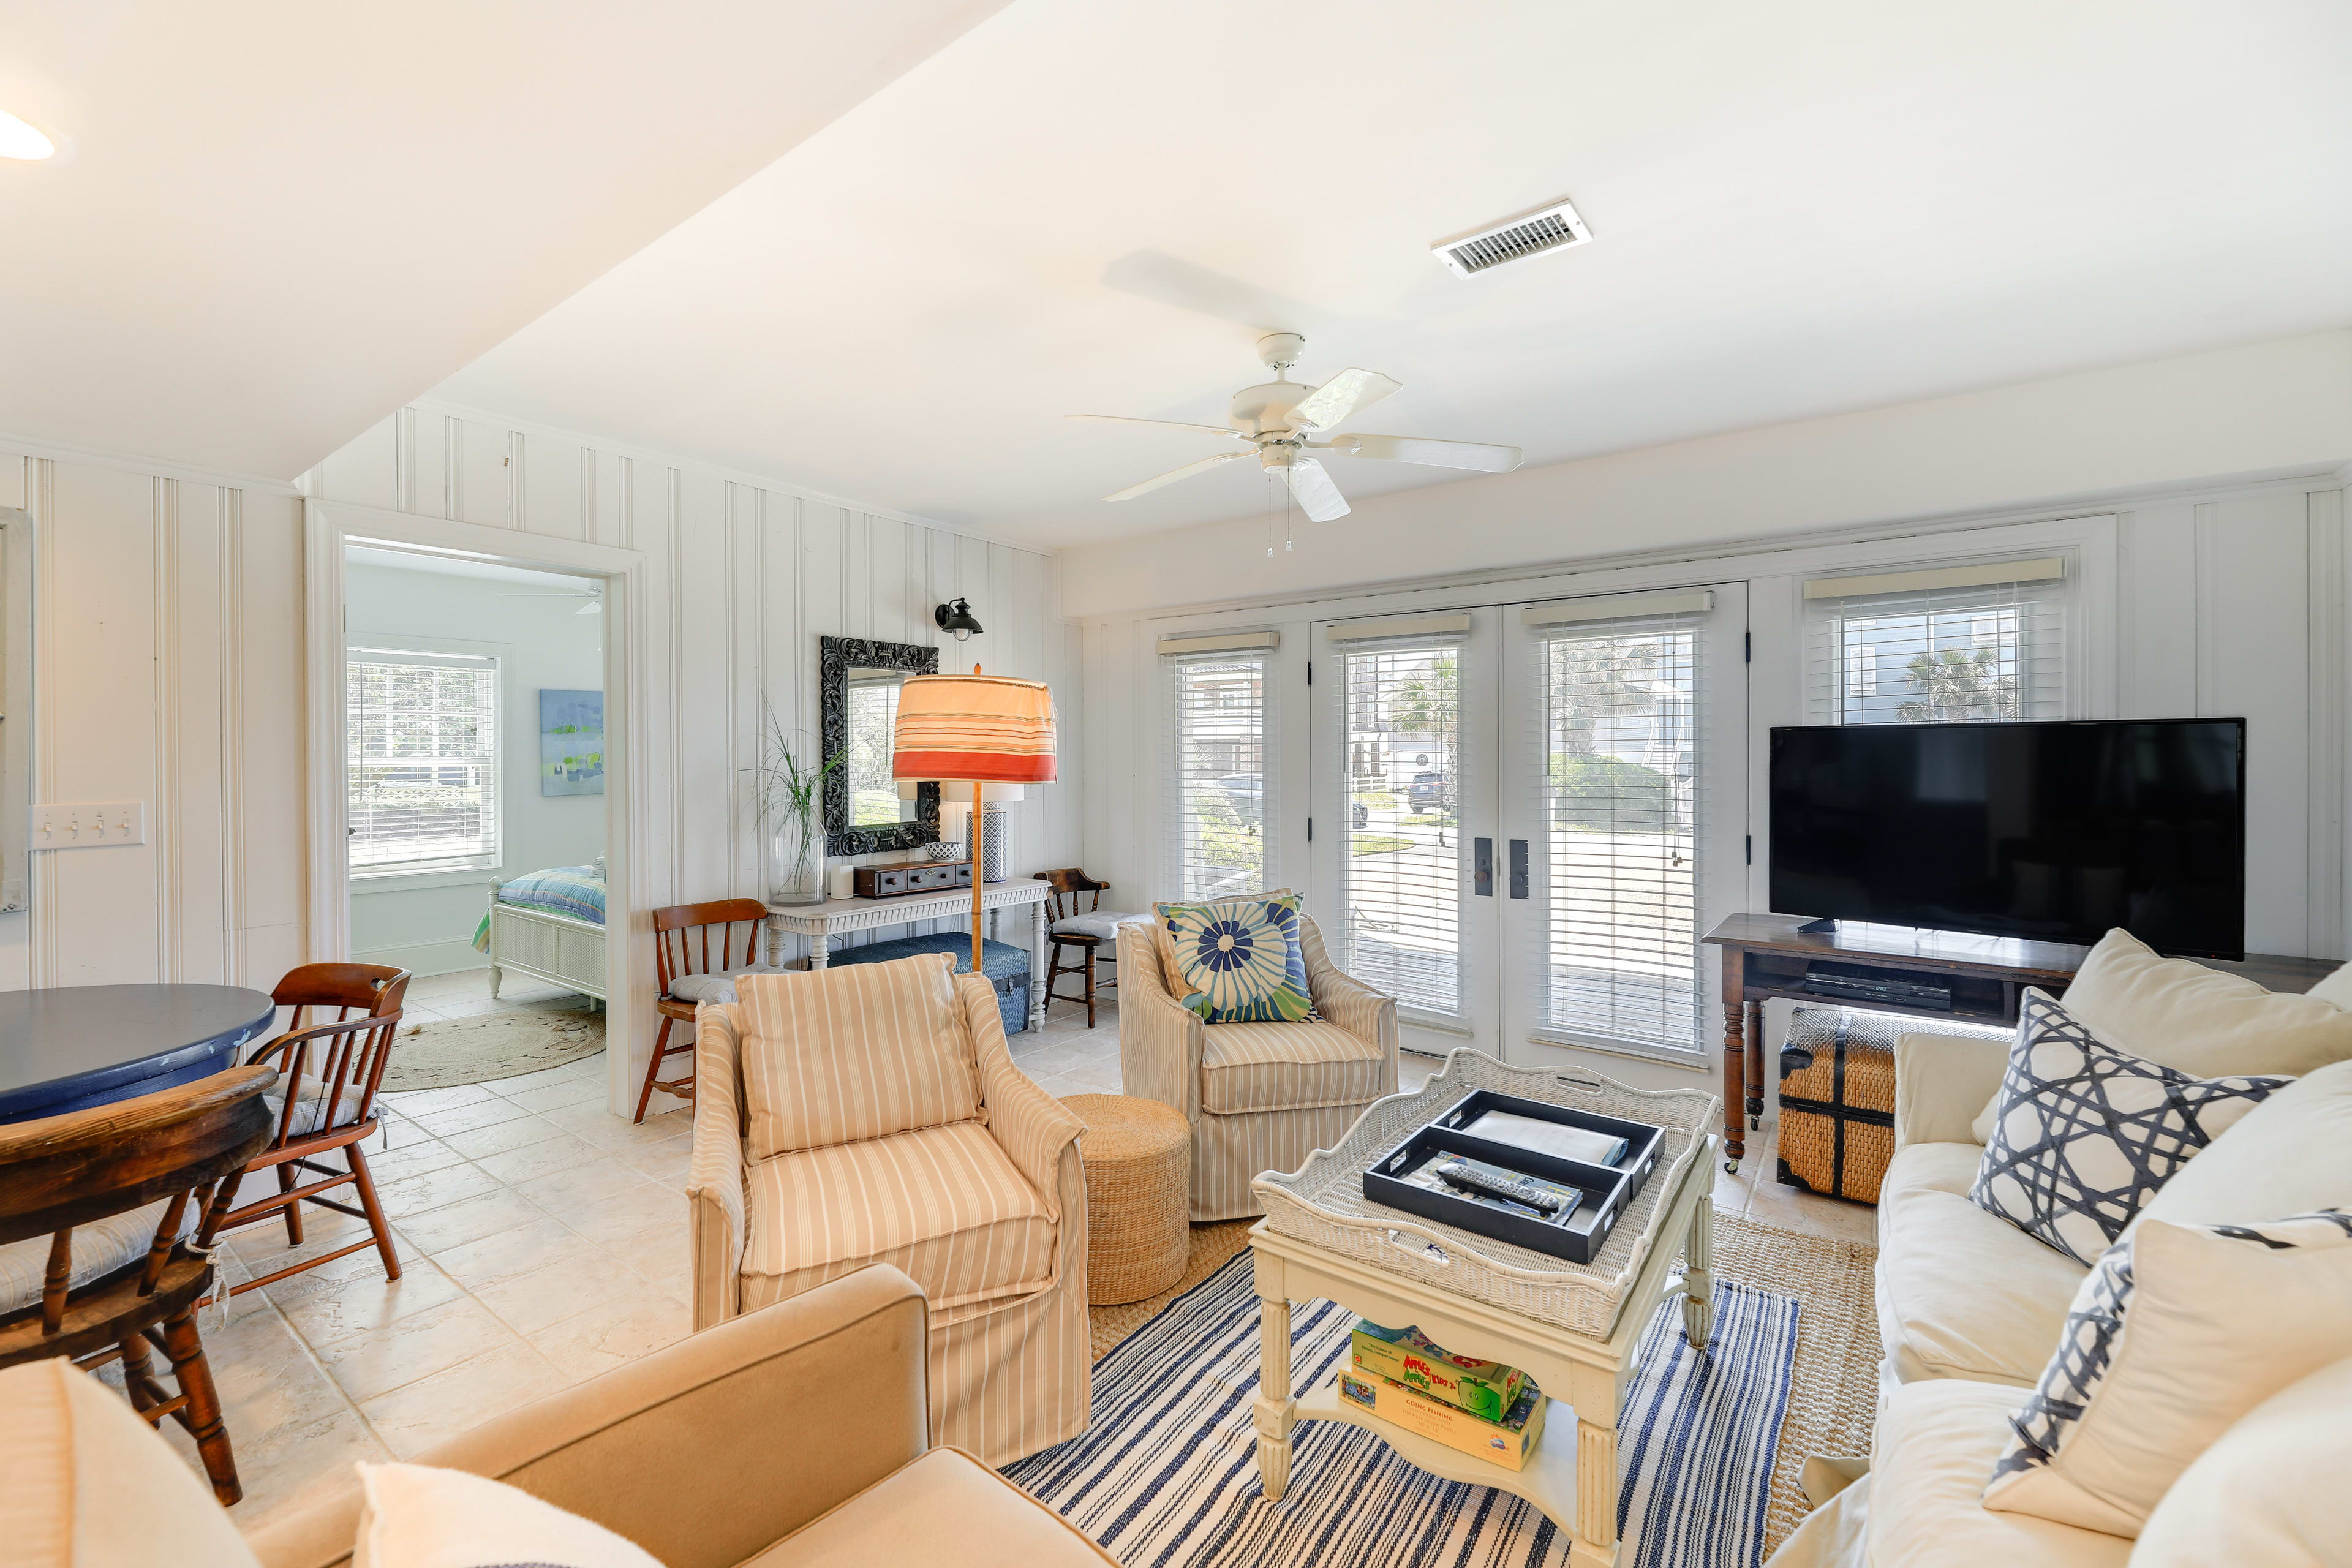 Atlantic Beach Vacation Rental | 3BR | 1.5BA | 1,200 Sq Ft | 2 Steps Required